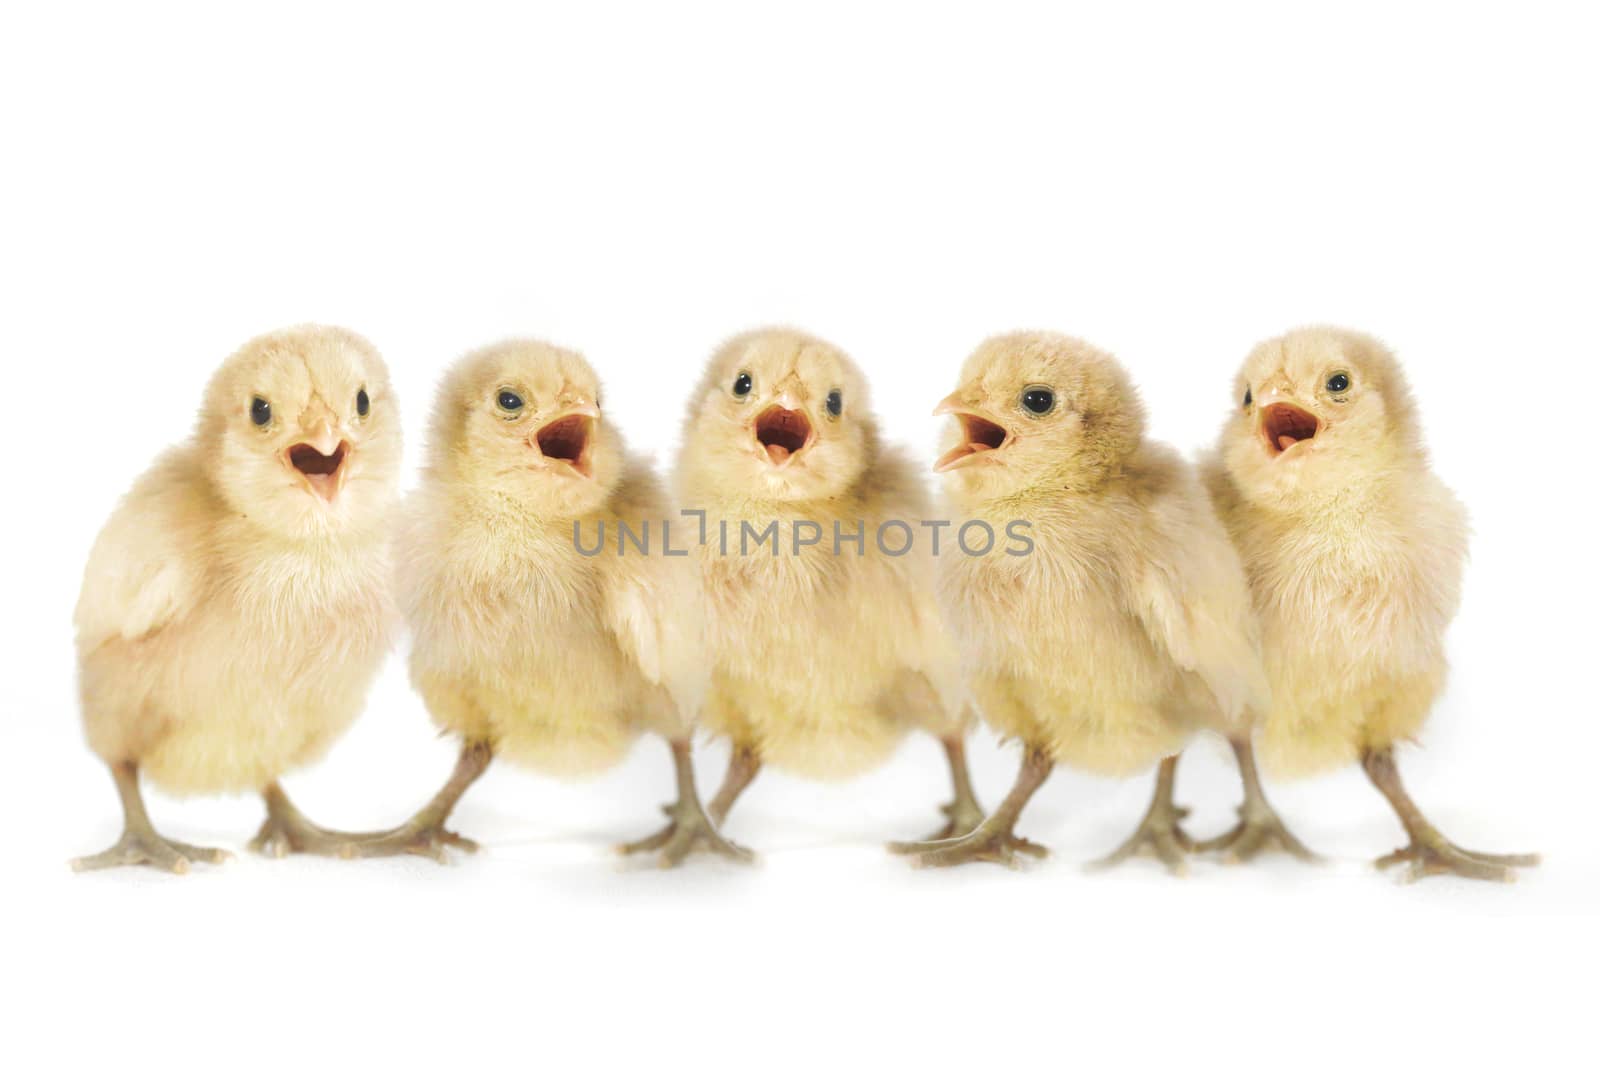 Singing Yellow Baby Chicks Lined Up